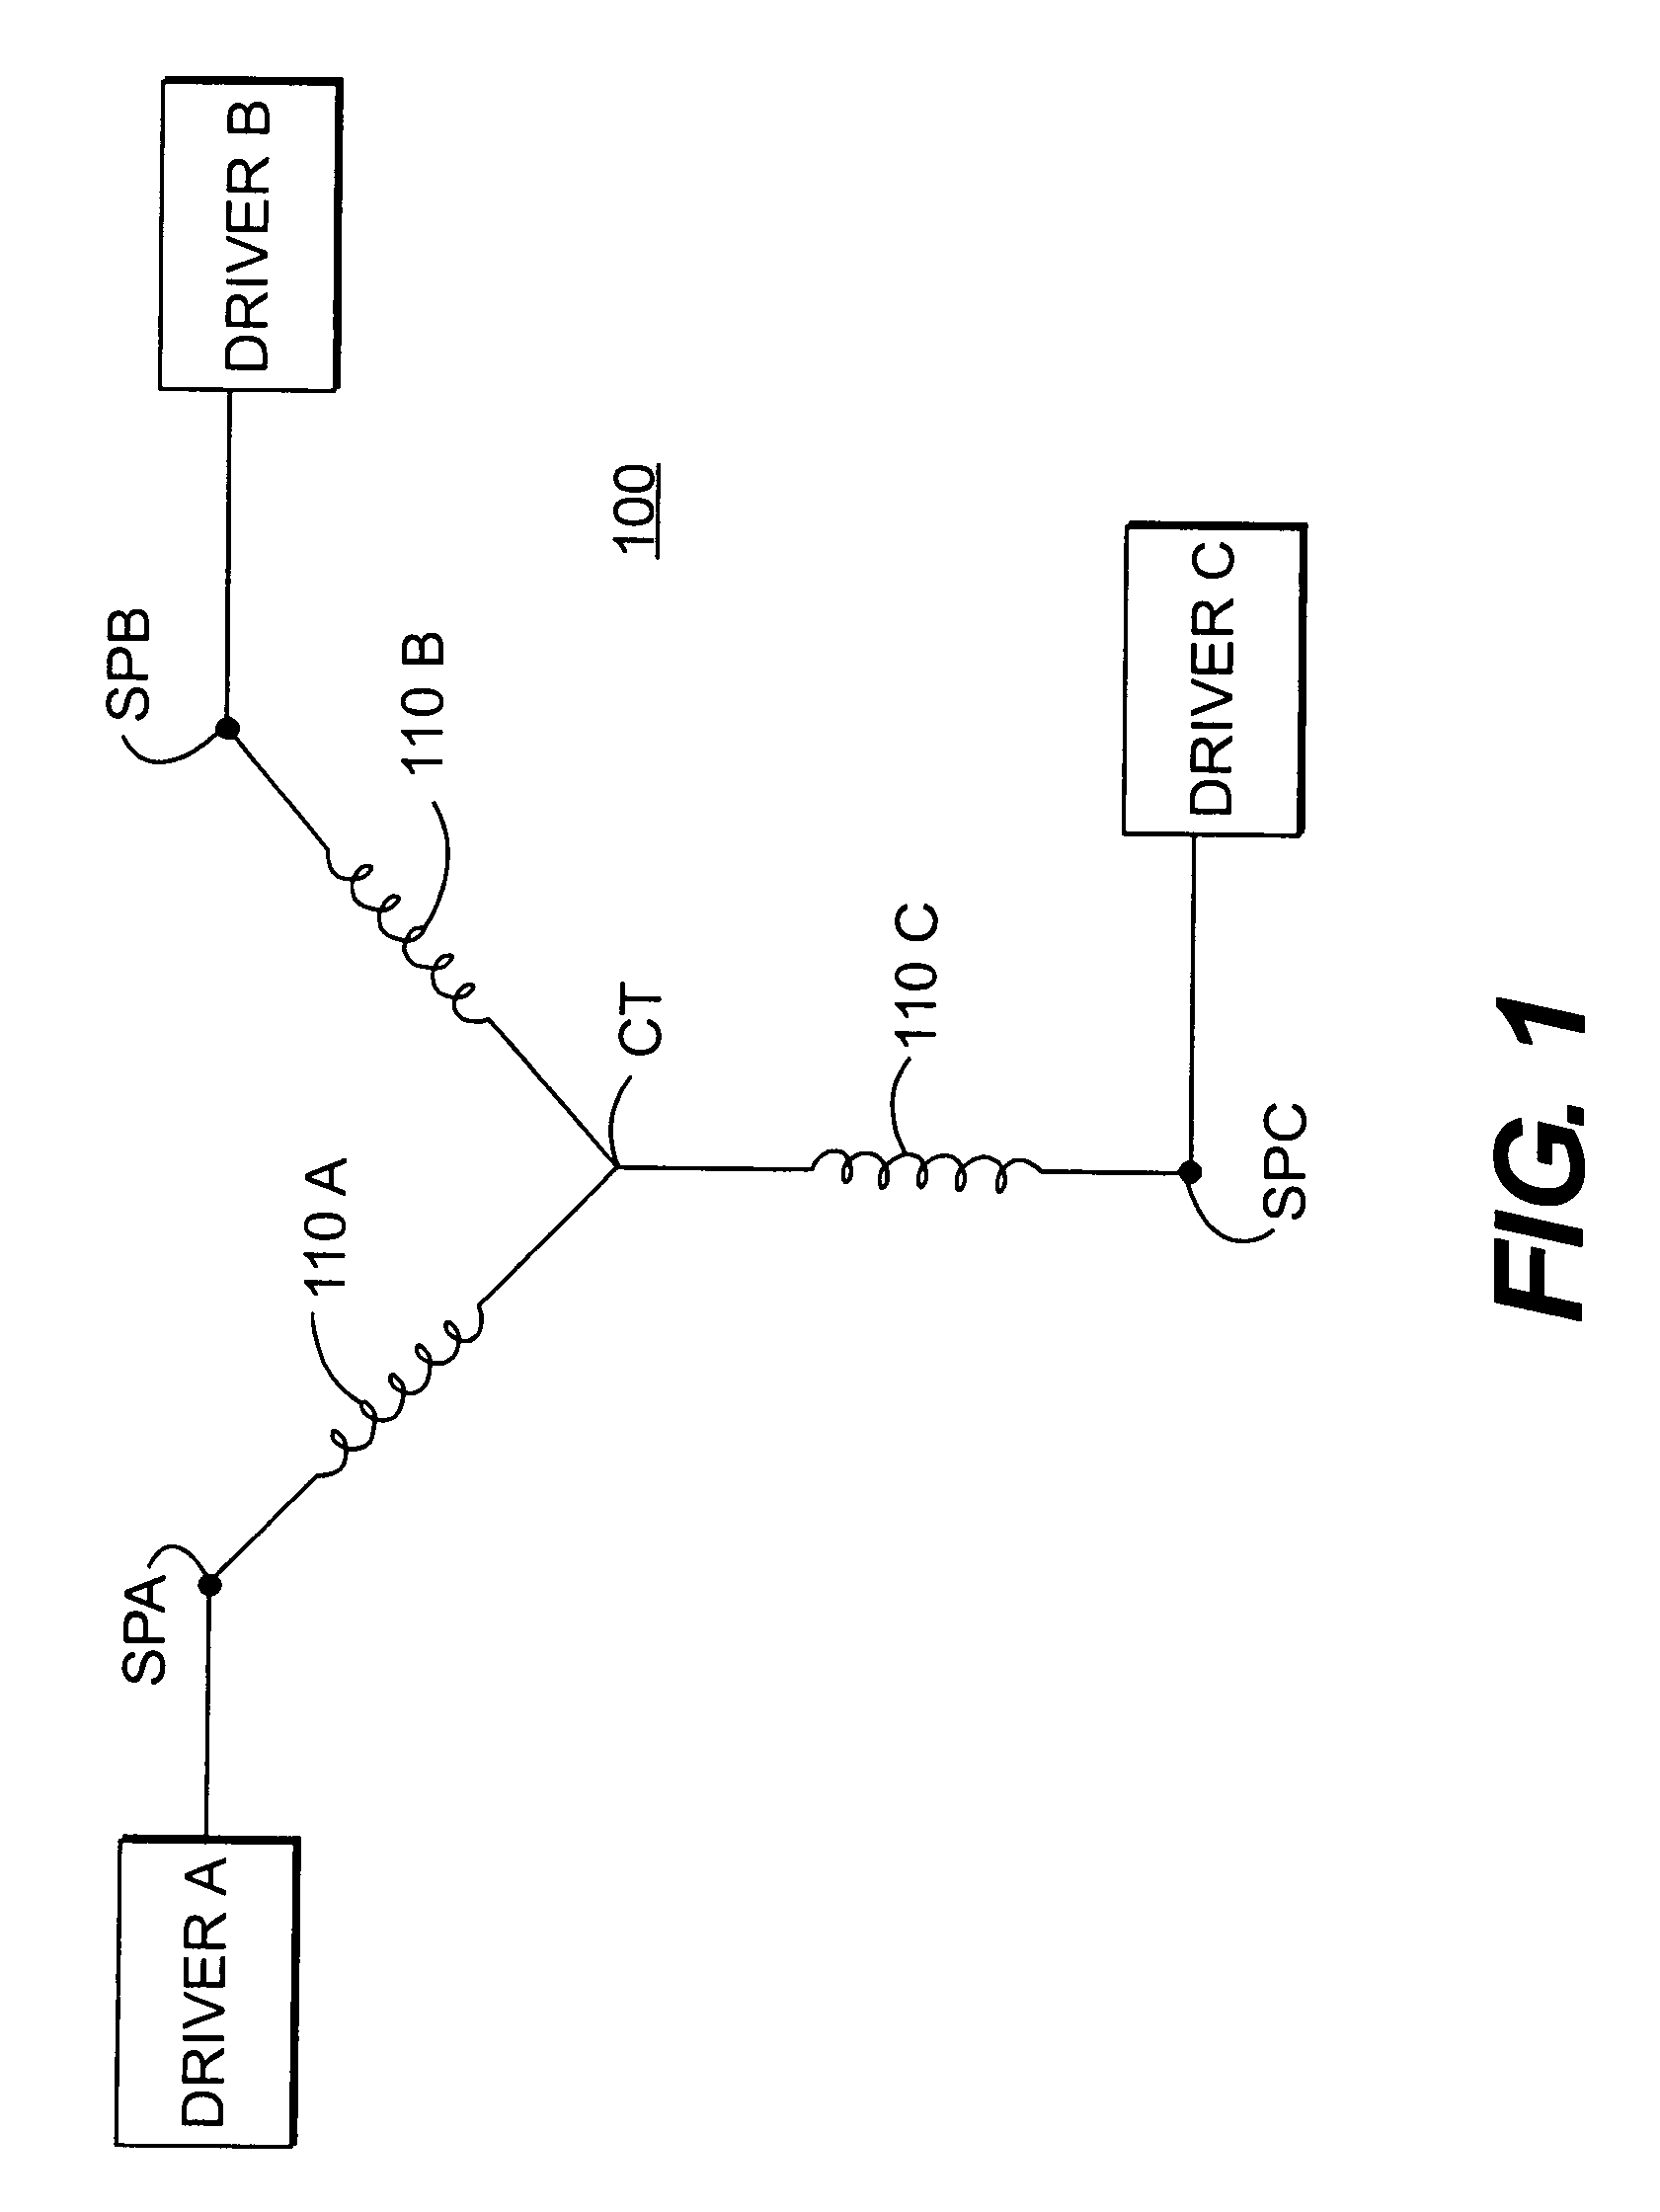 System and method for detecting back electromotive force with automatic pole calibration